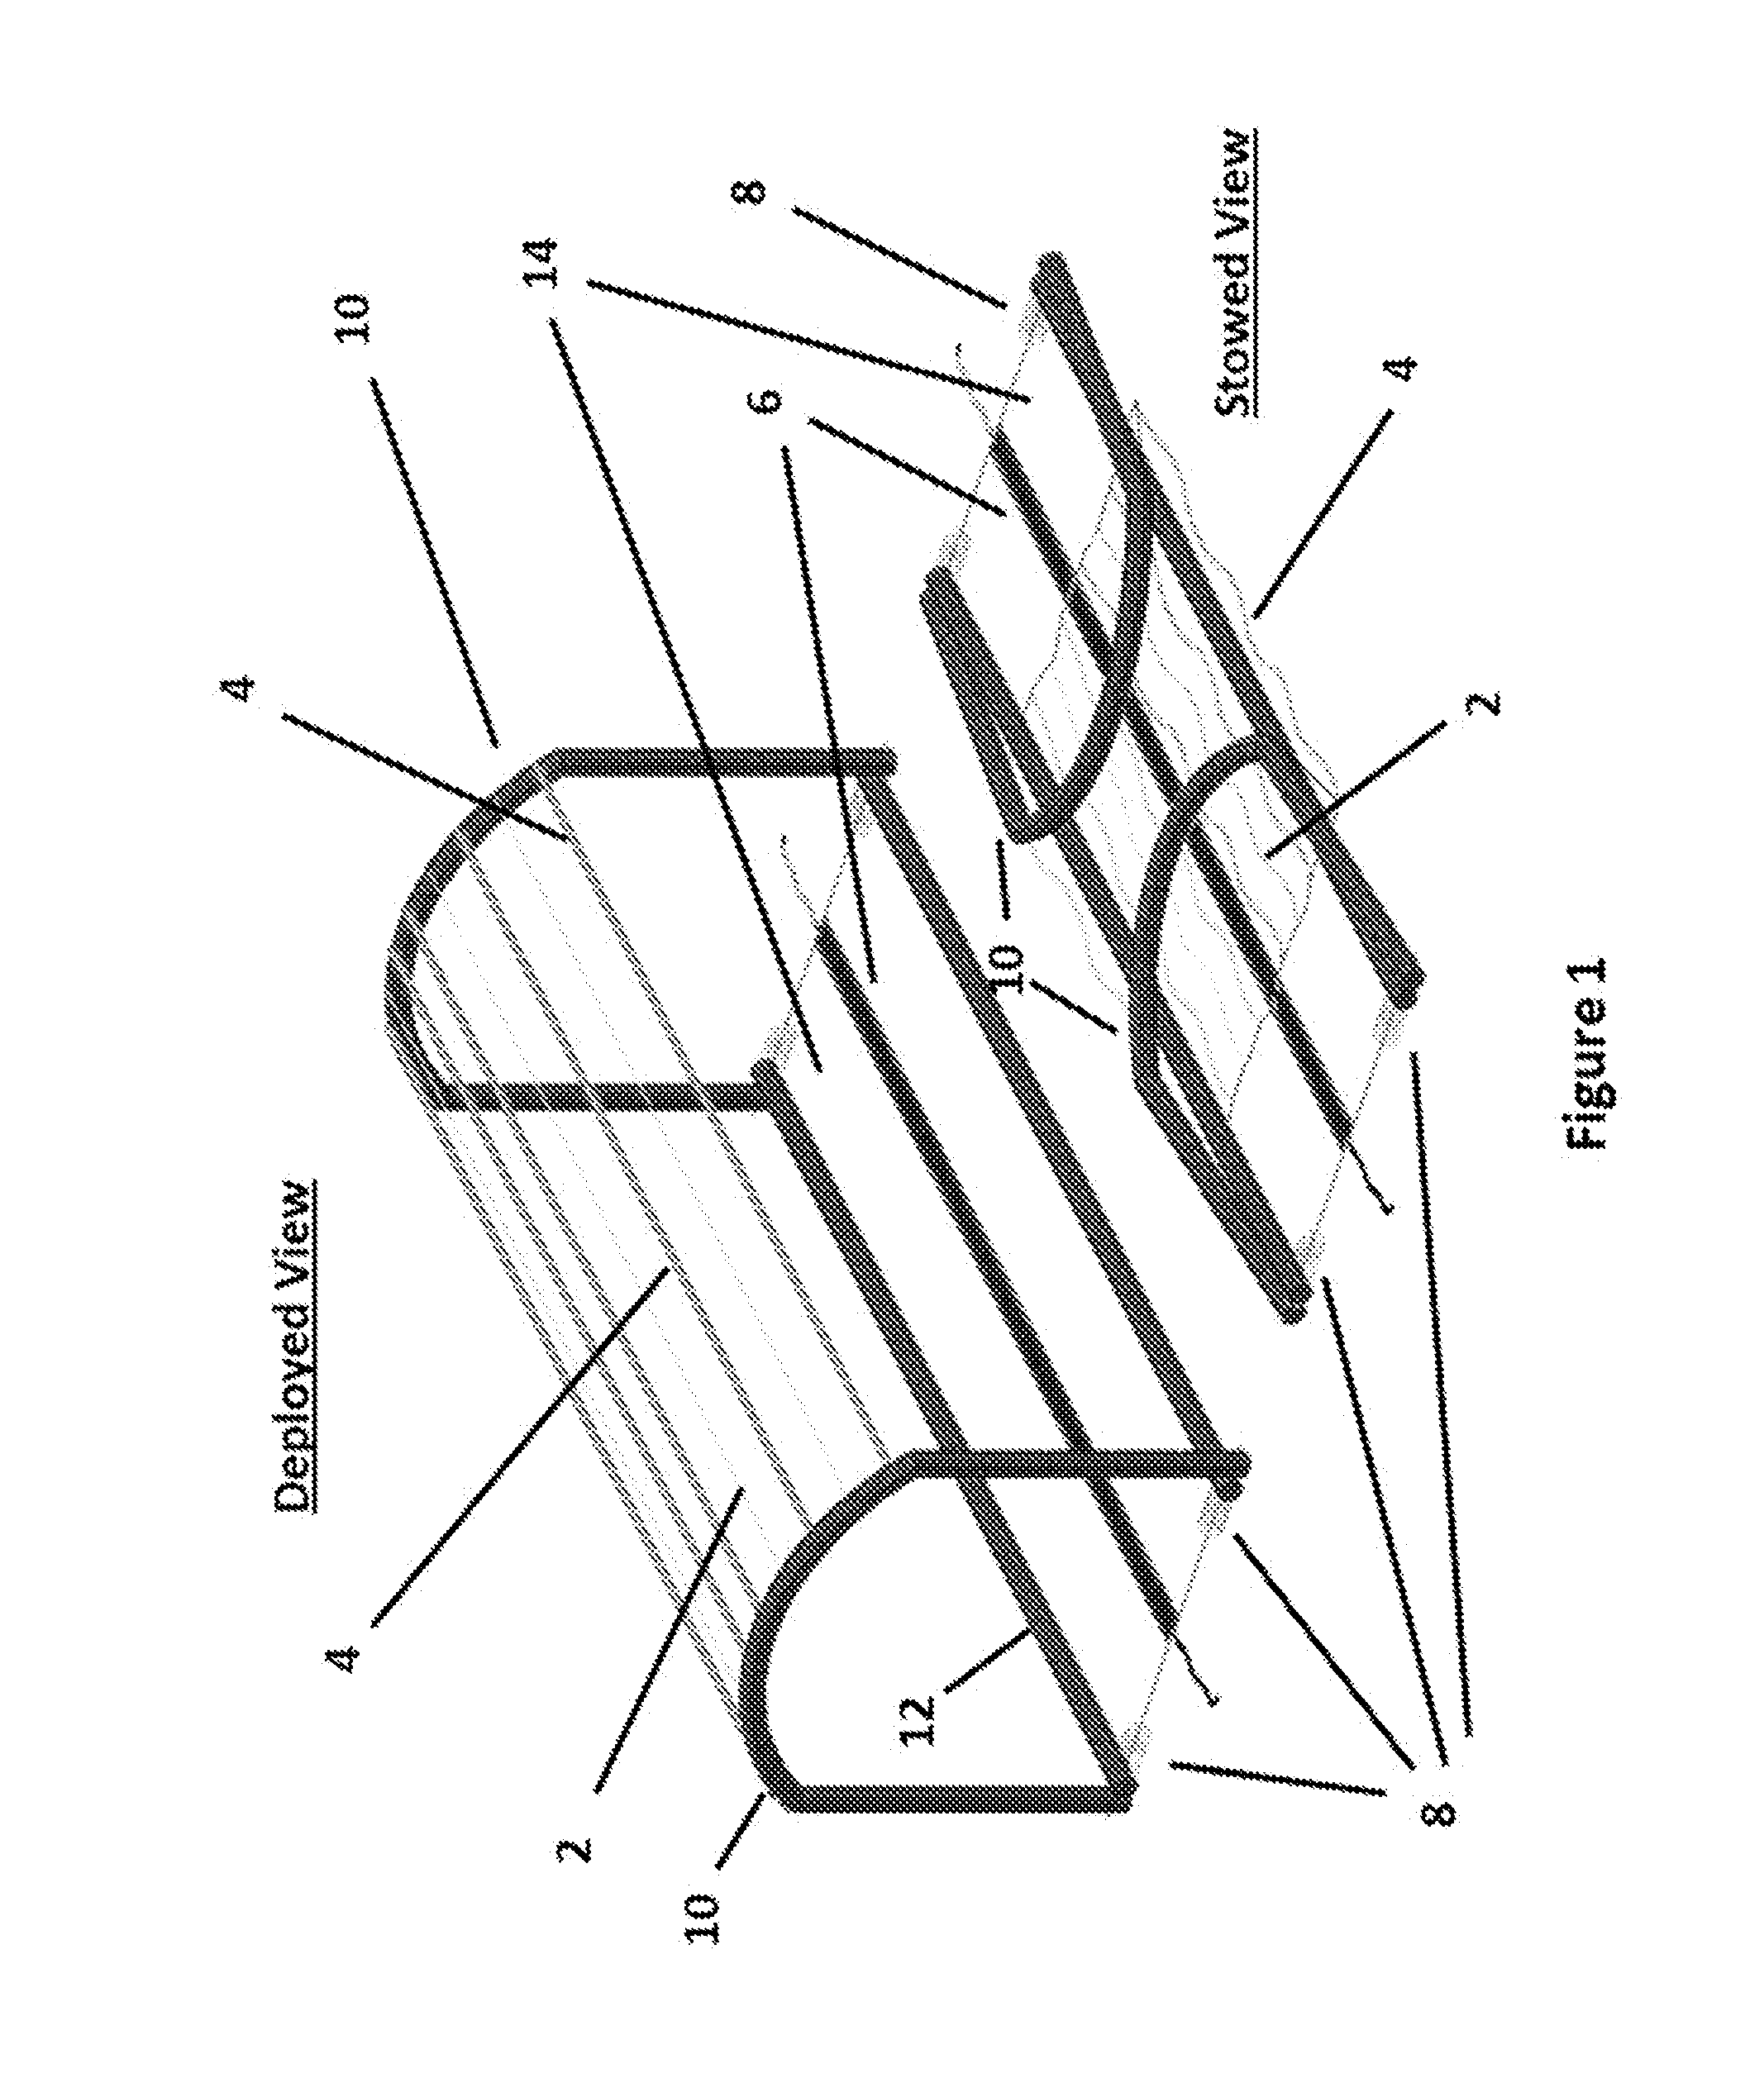 Stretched Fresnel Lens Solar Concentrator for Space Power, with Cords, Fibers, or Wires Strengthening the Stretched Lens